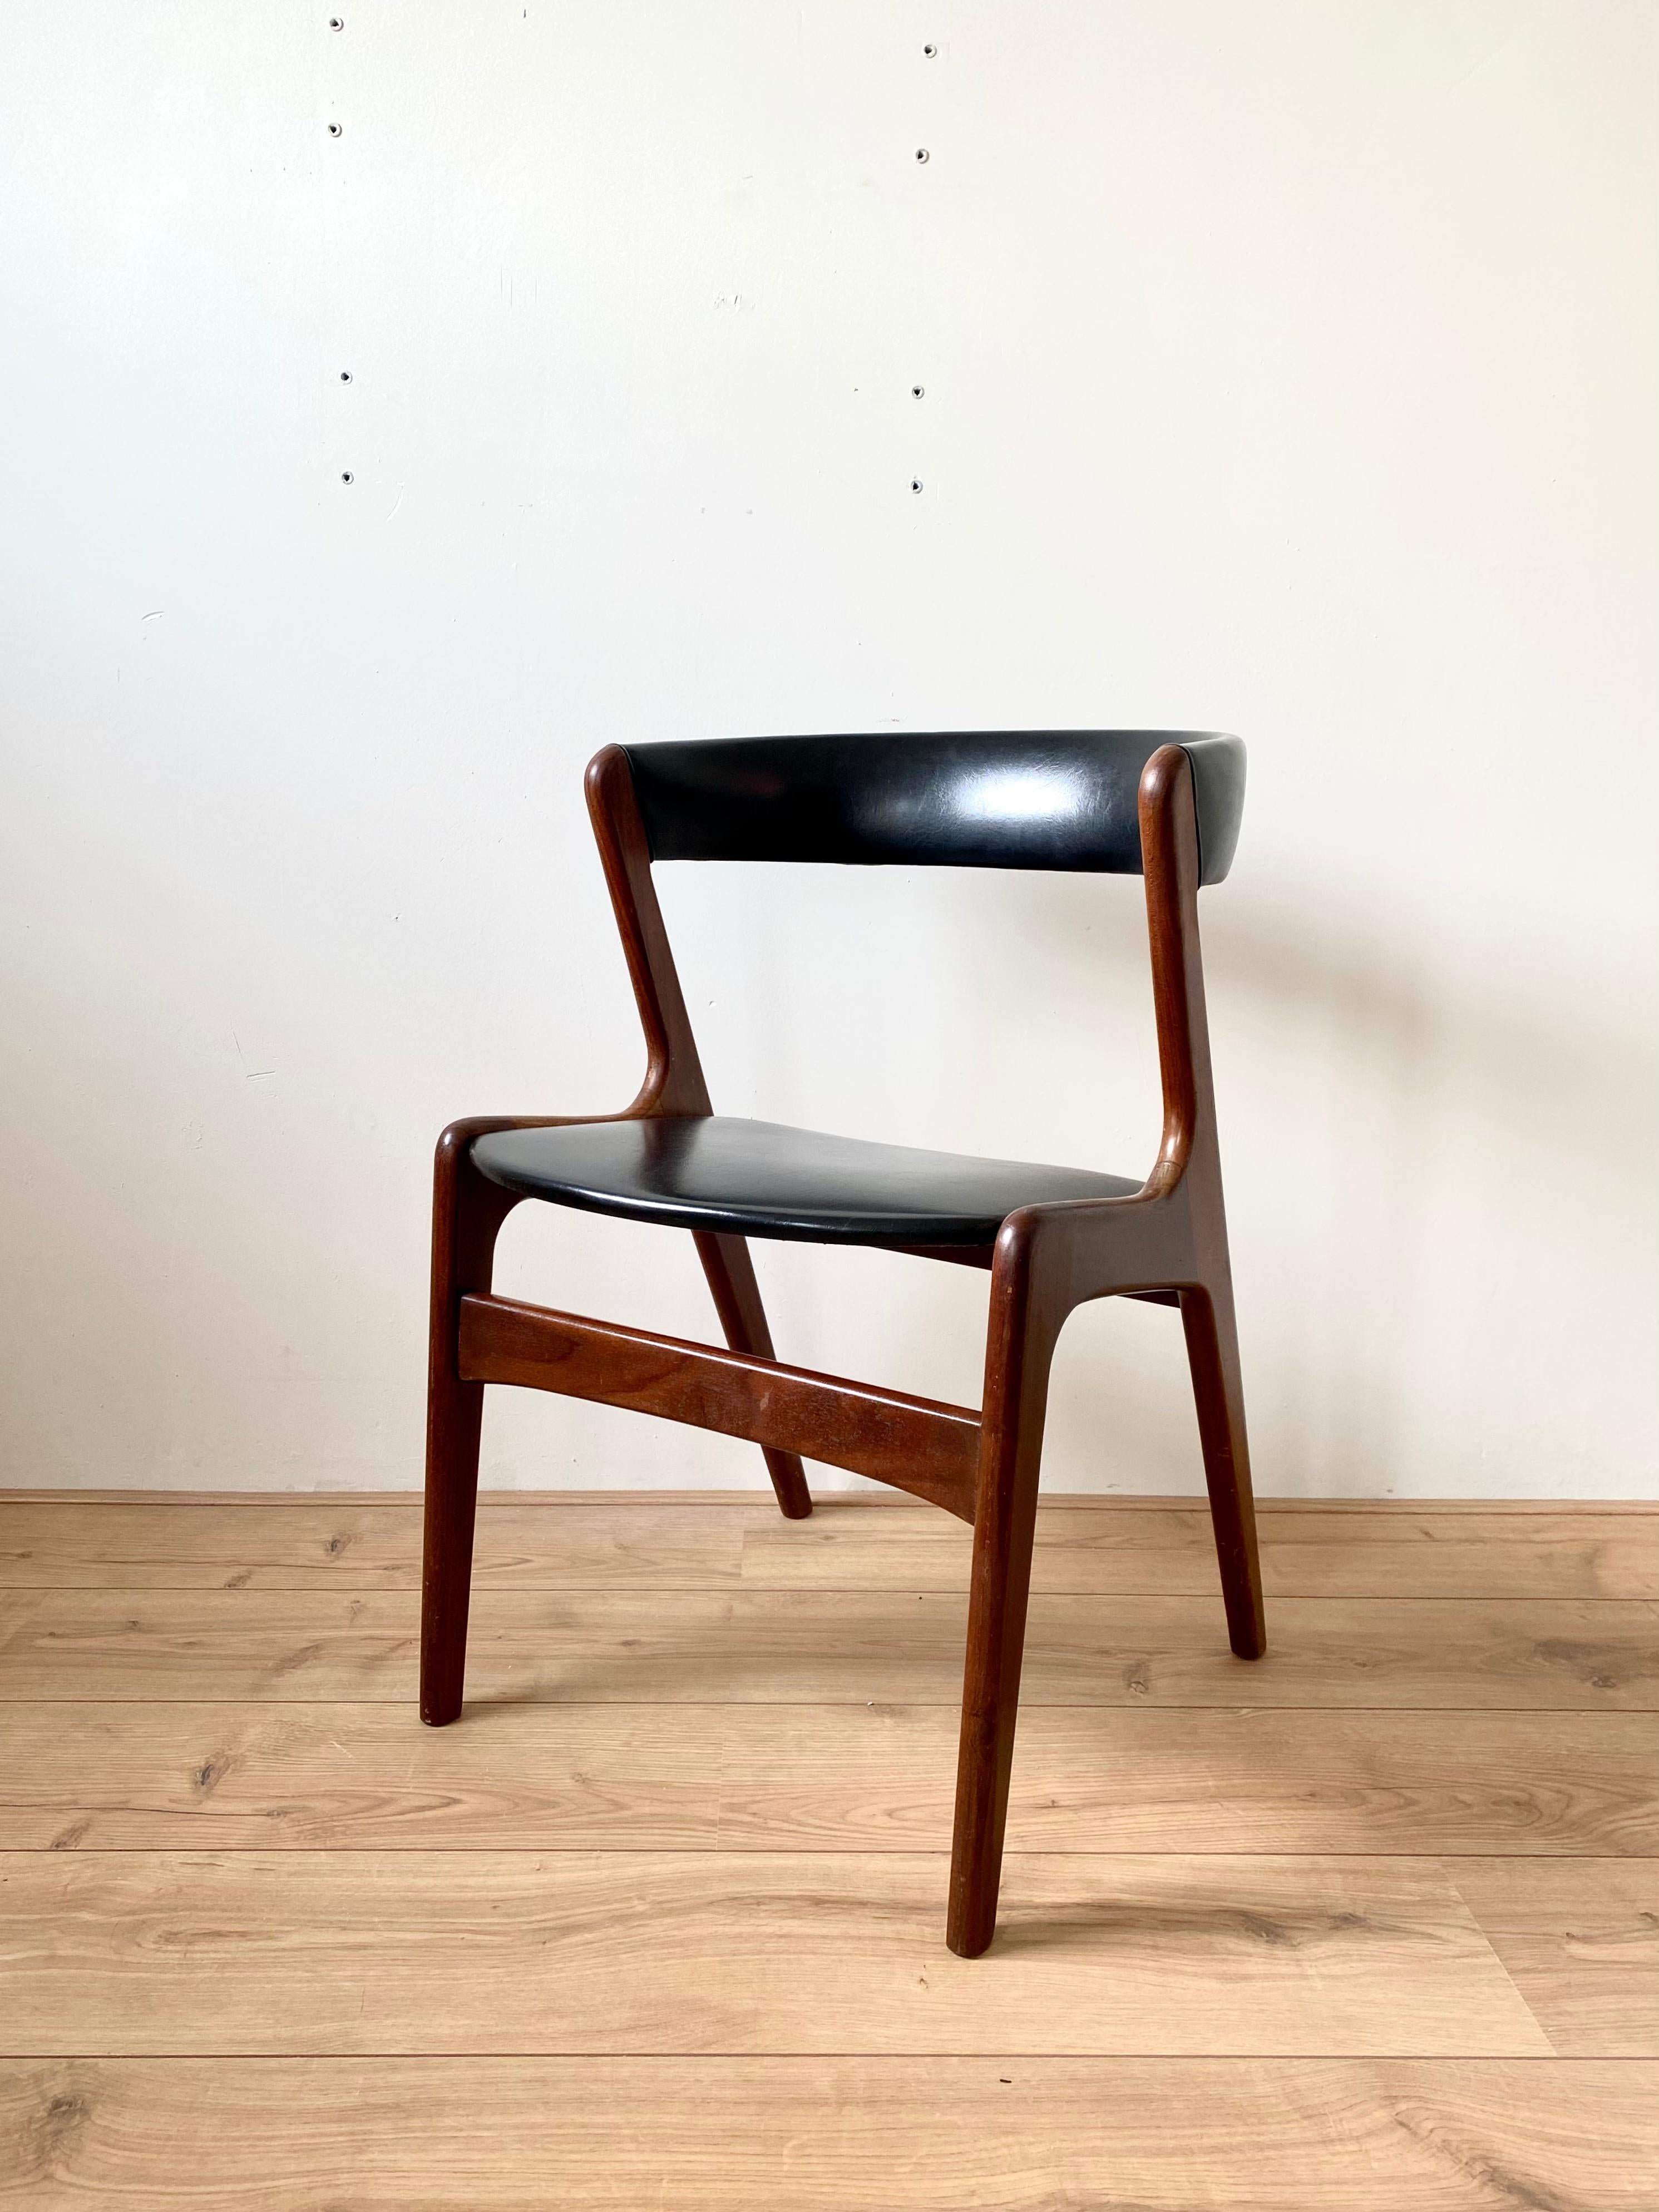 Faux Leather Midcentury Danish Design Dining Chairs By T.H. Harlev for Farstrup Mobler. For Sale